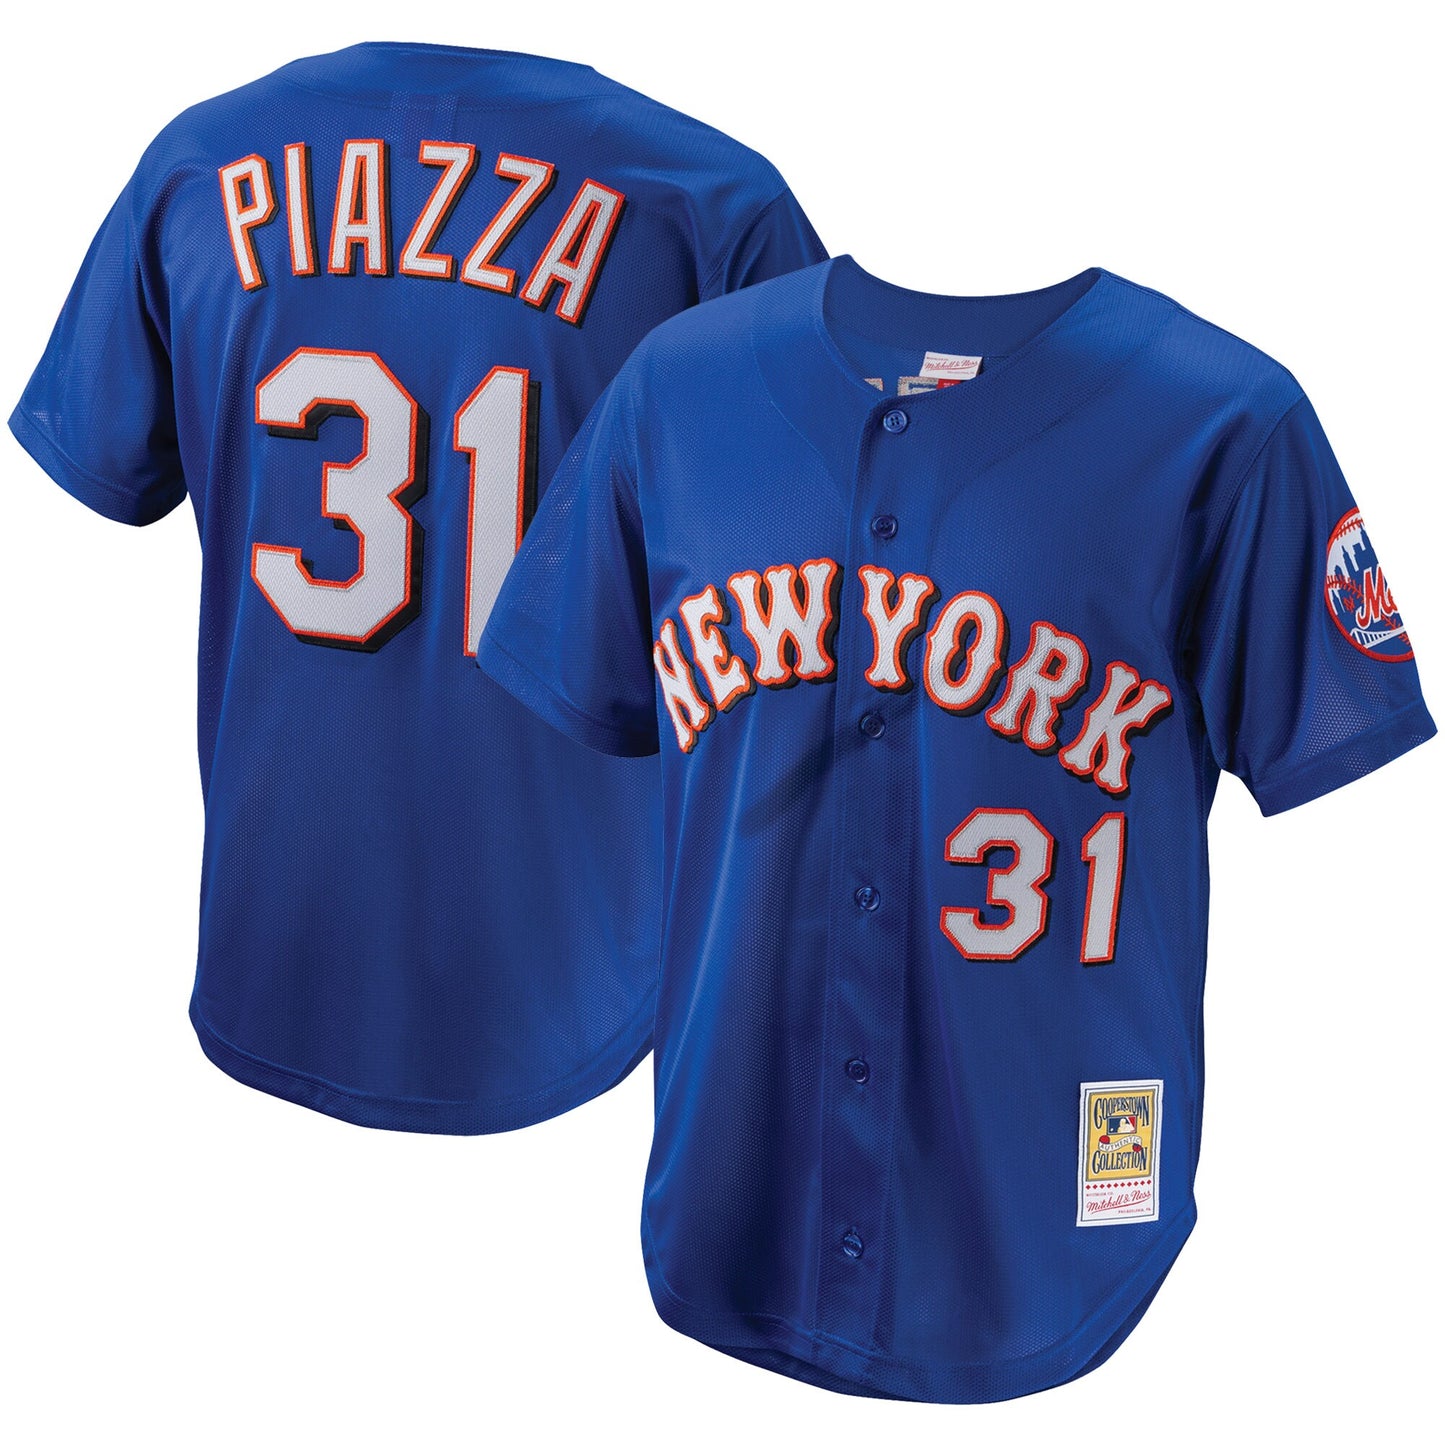 Mike Piazza New York Mets Mitchell & Ness Cooperstown Collection Mesh Batting Practice Button-Up Jersey - Royal